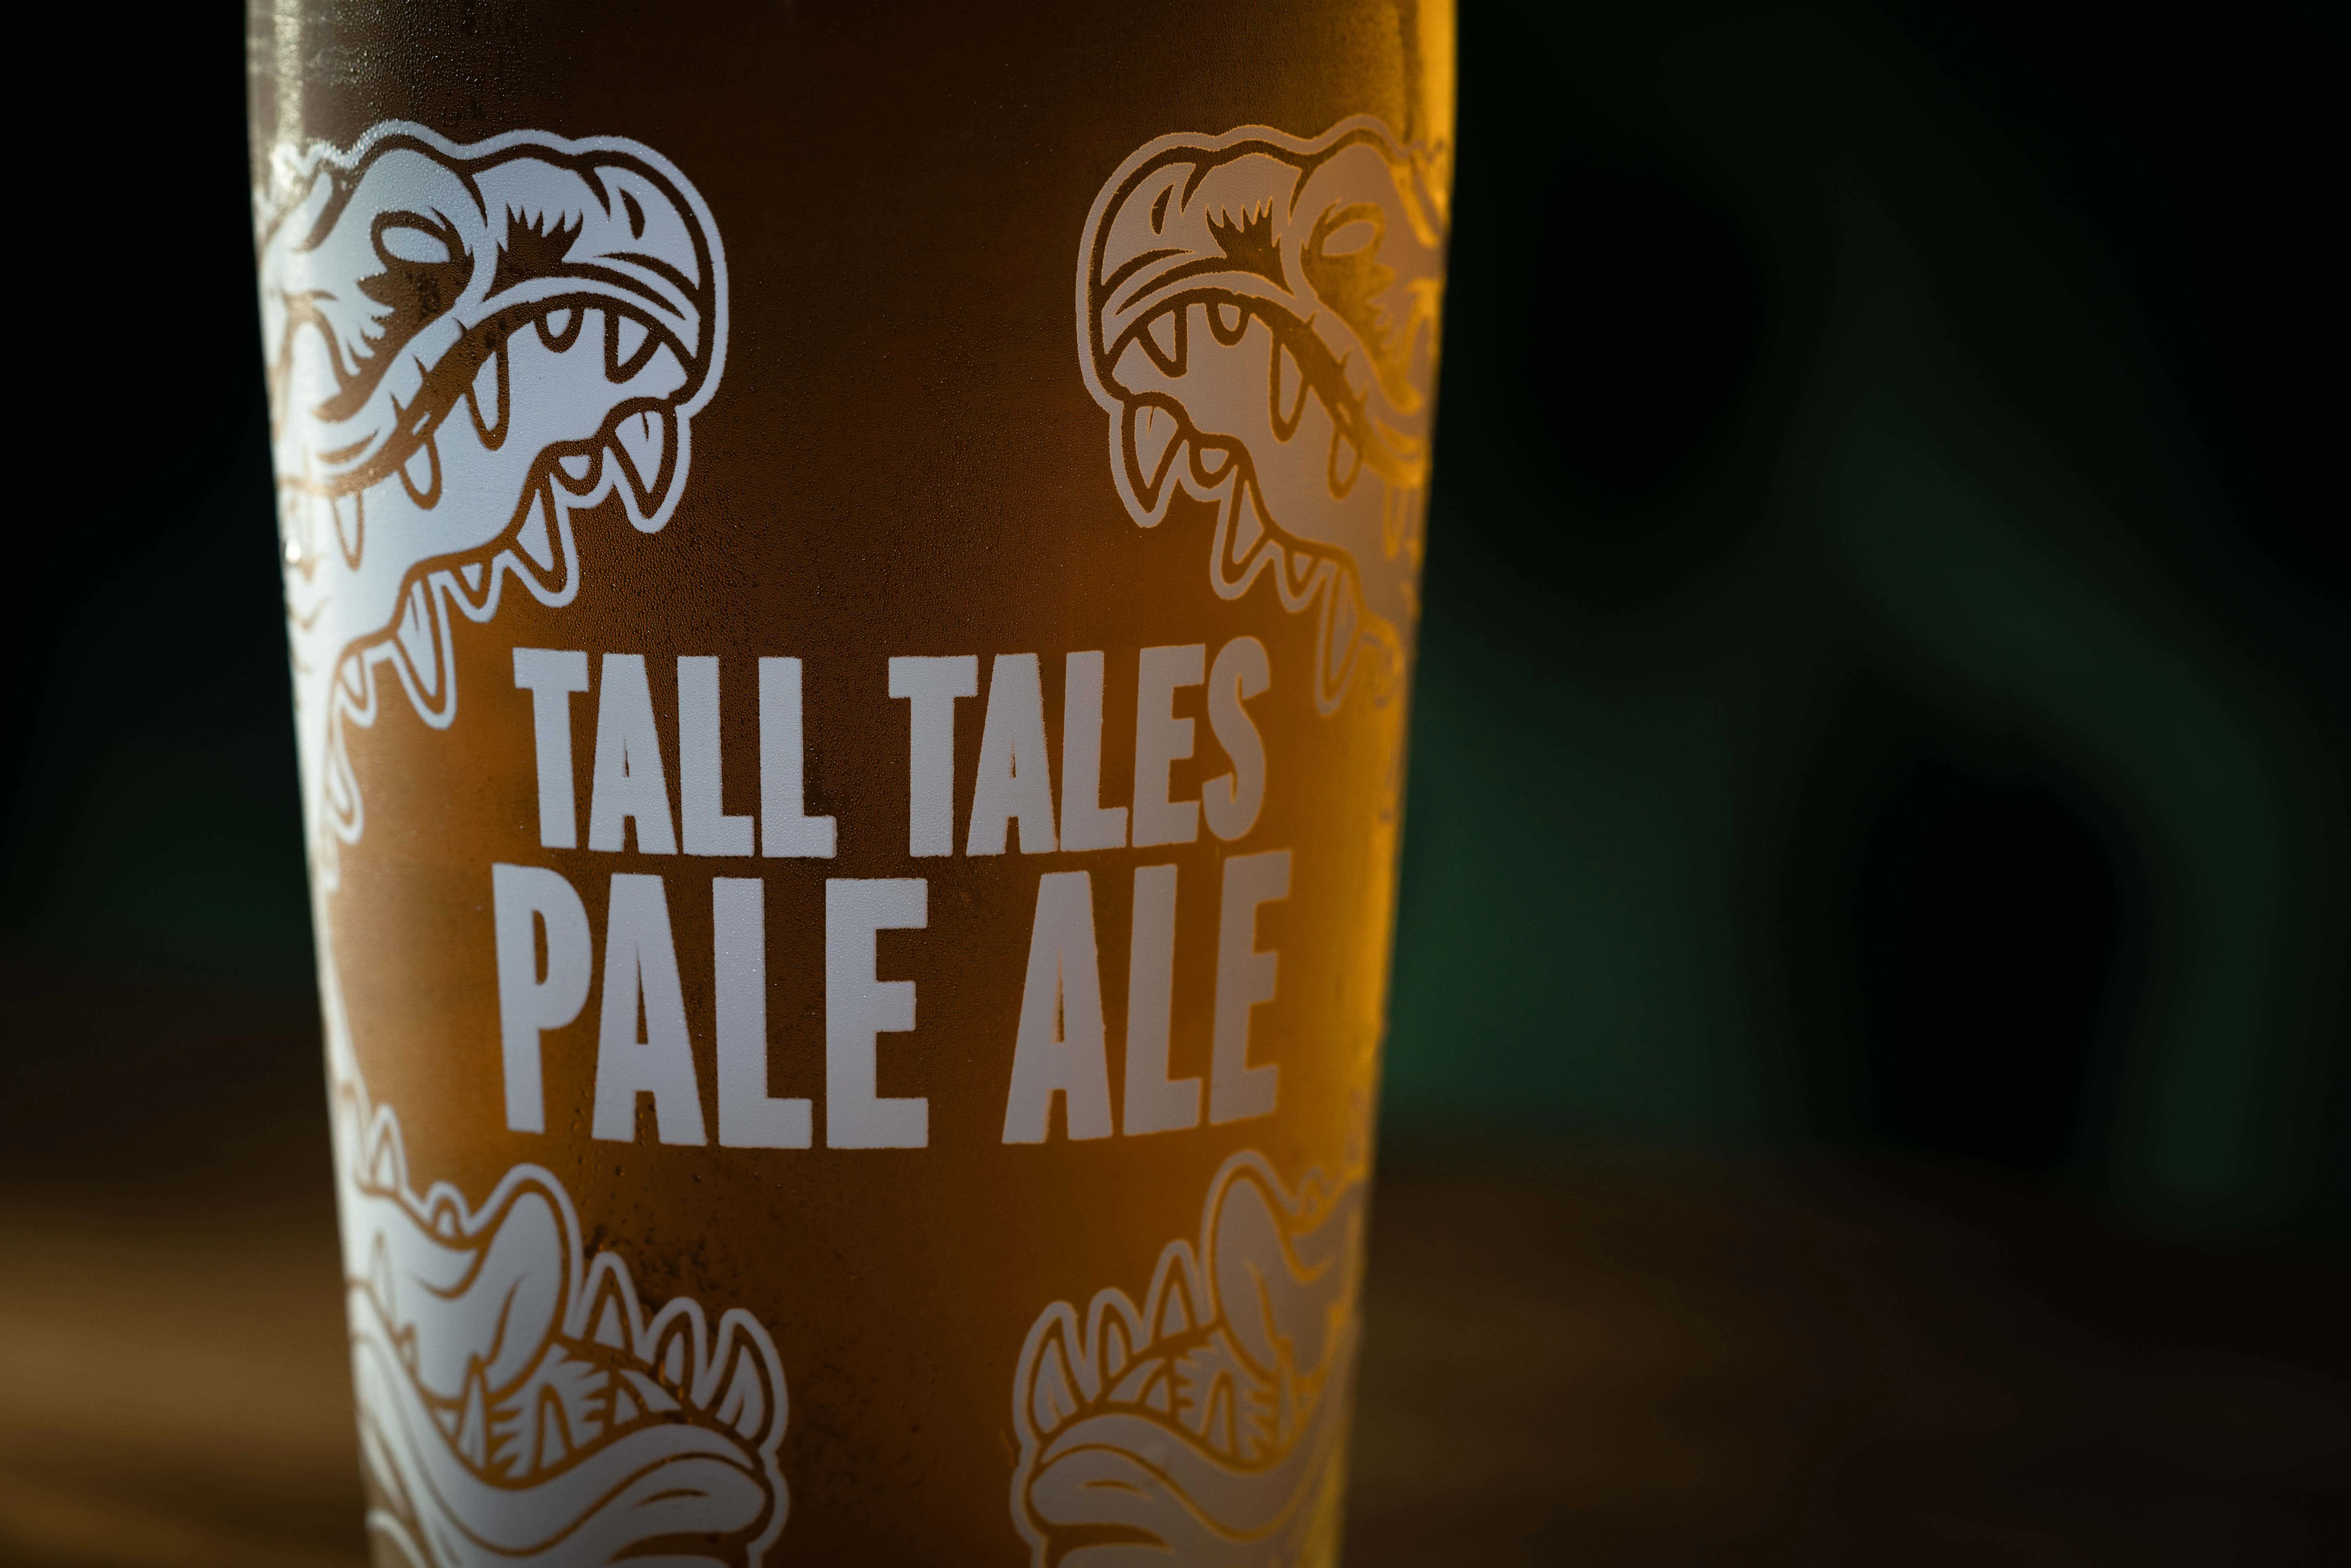 WIN A CASE OF TALL TALES PALE ALE